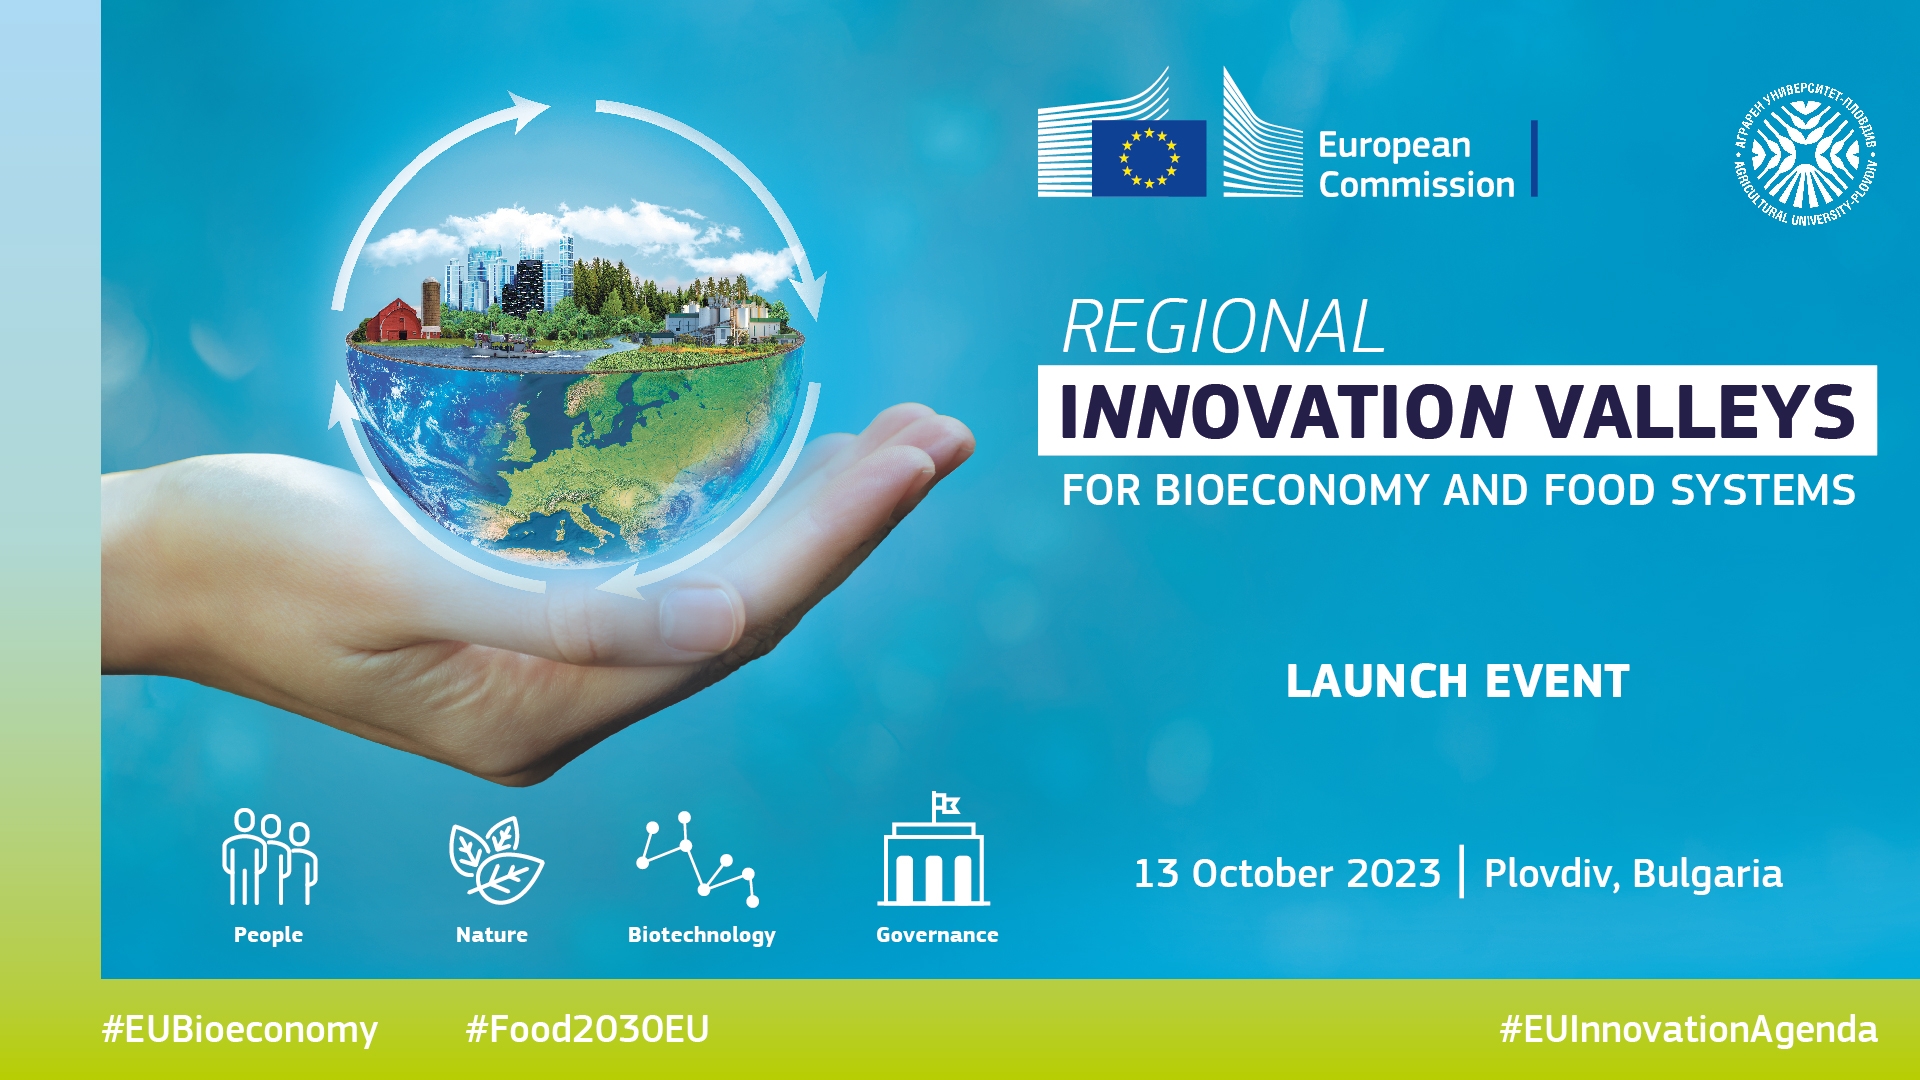 "Regional Innovation Valleys for Bioeconomy and Food Systems" launch event